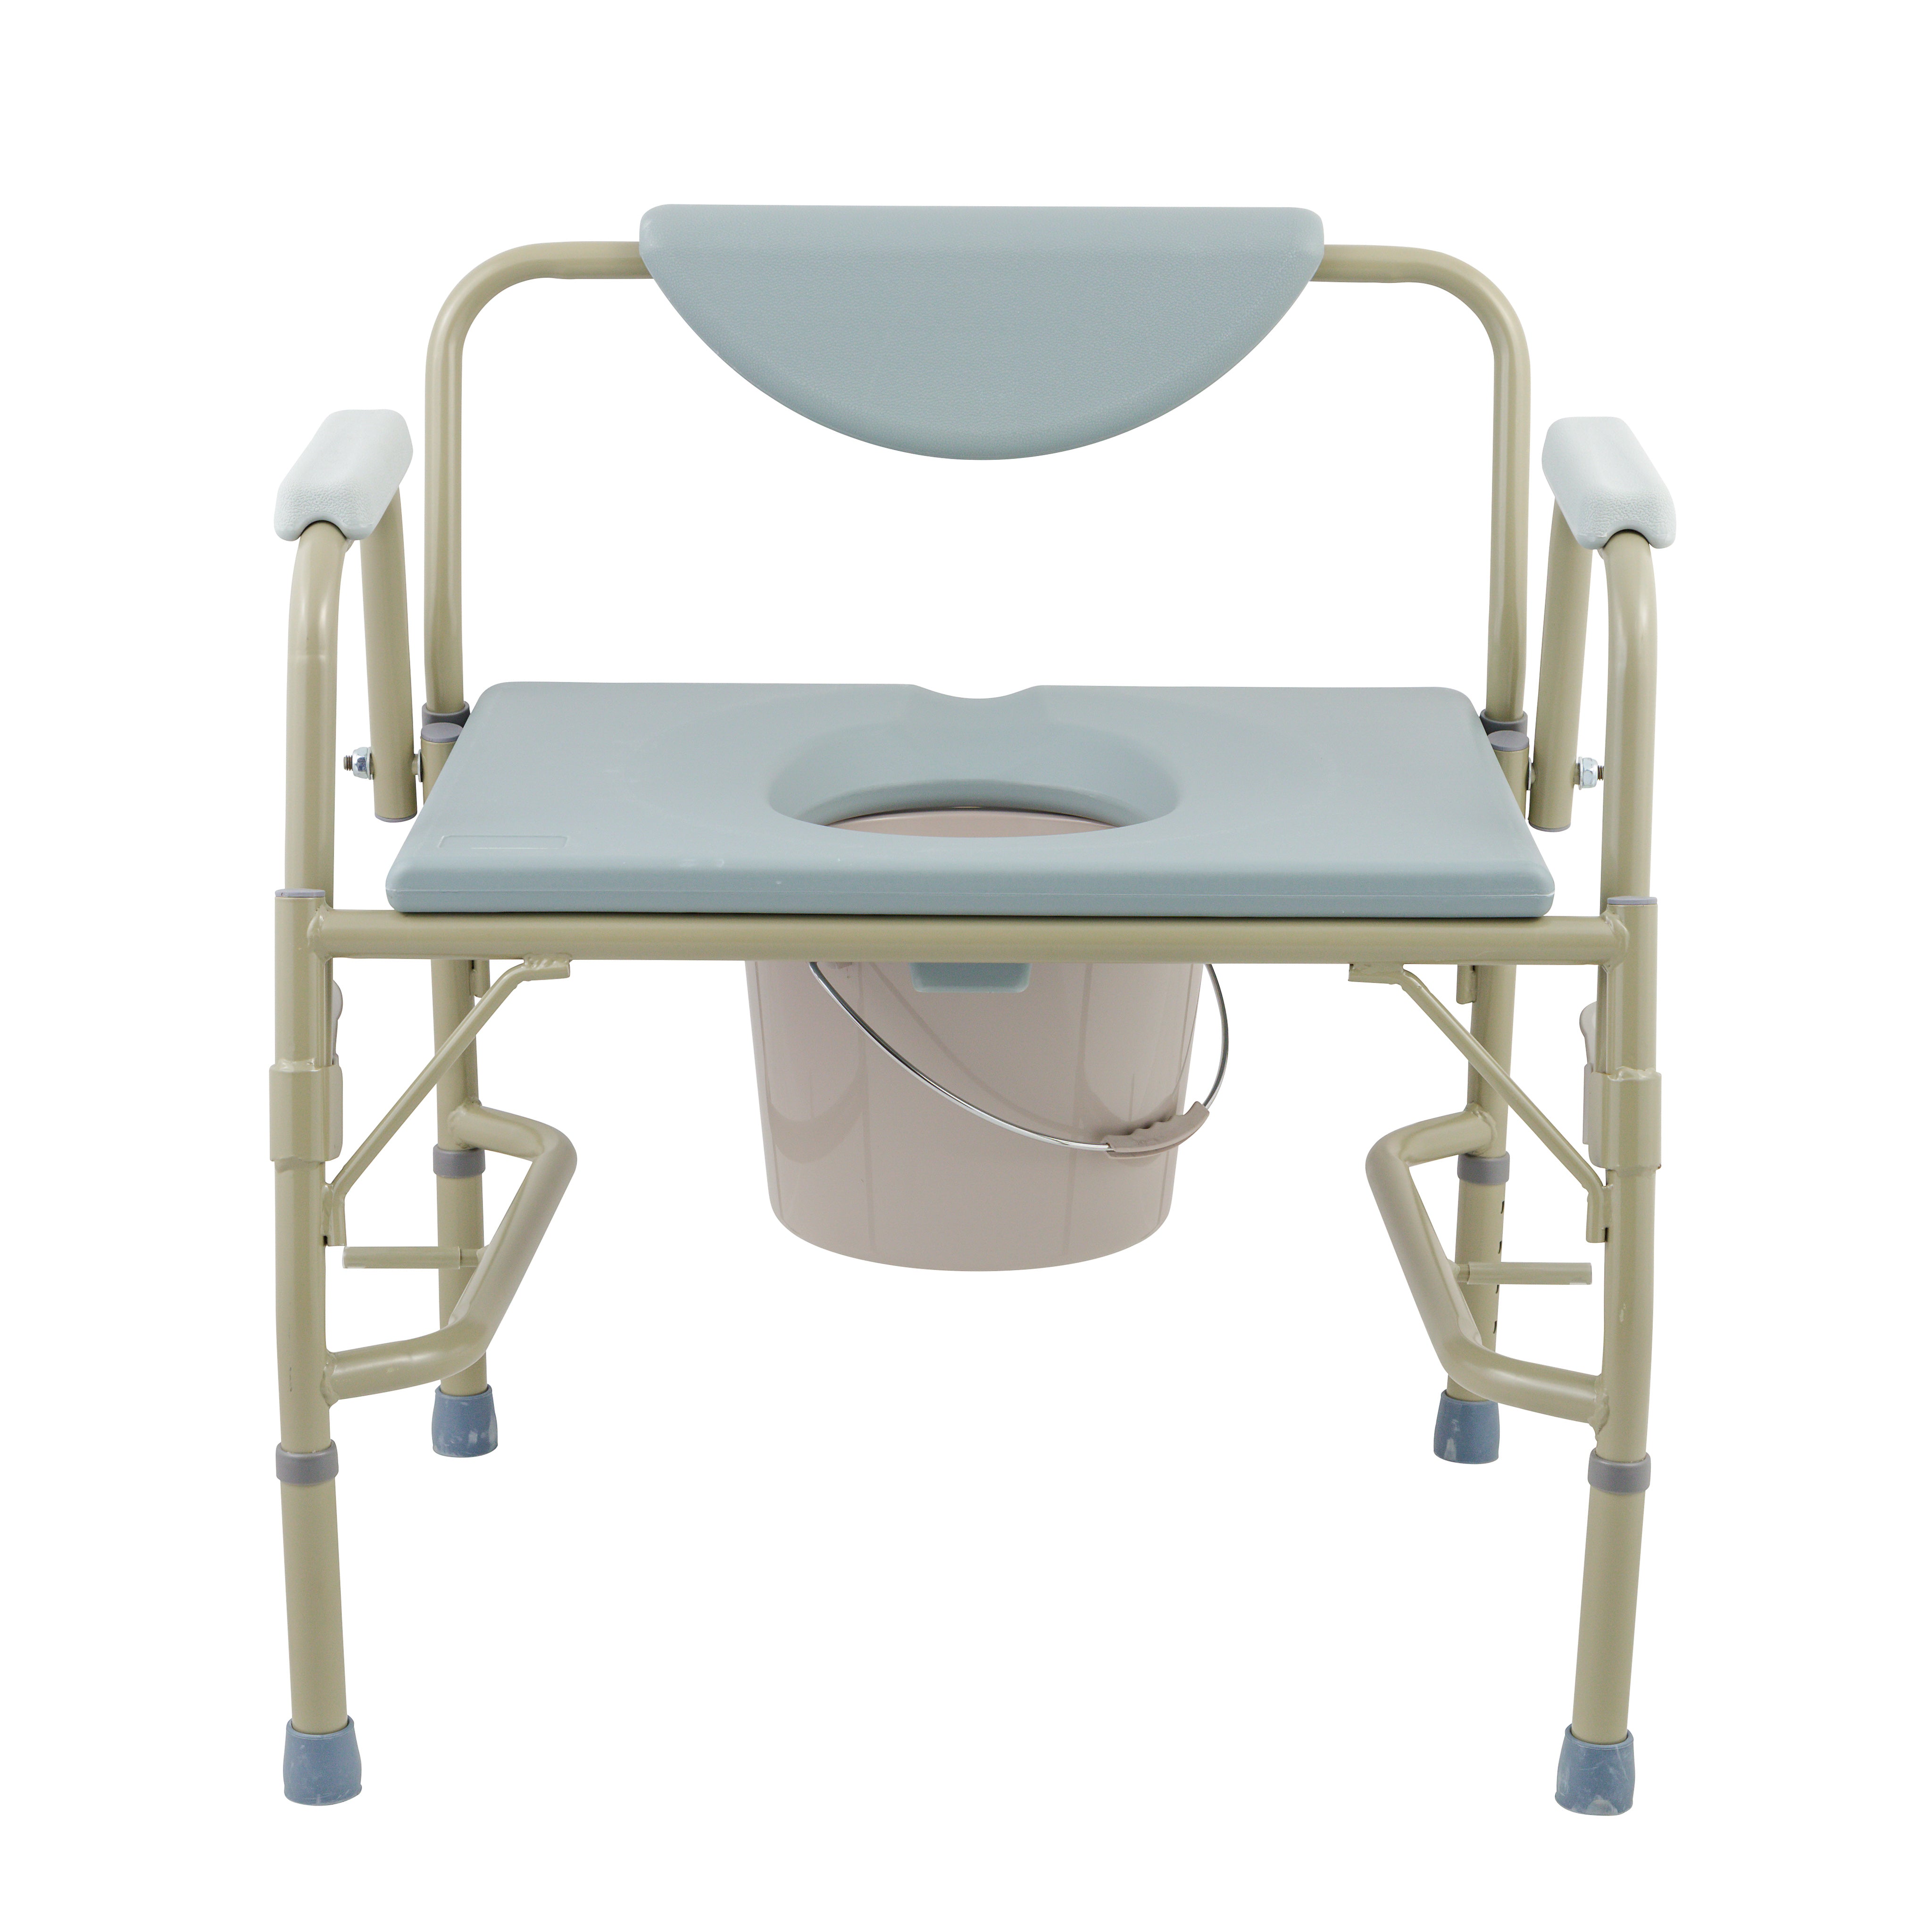 Adjustable Heavy Duty Folding Drop Arm Steel Bariatric Bedside Commode chair, Gray